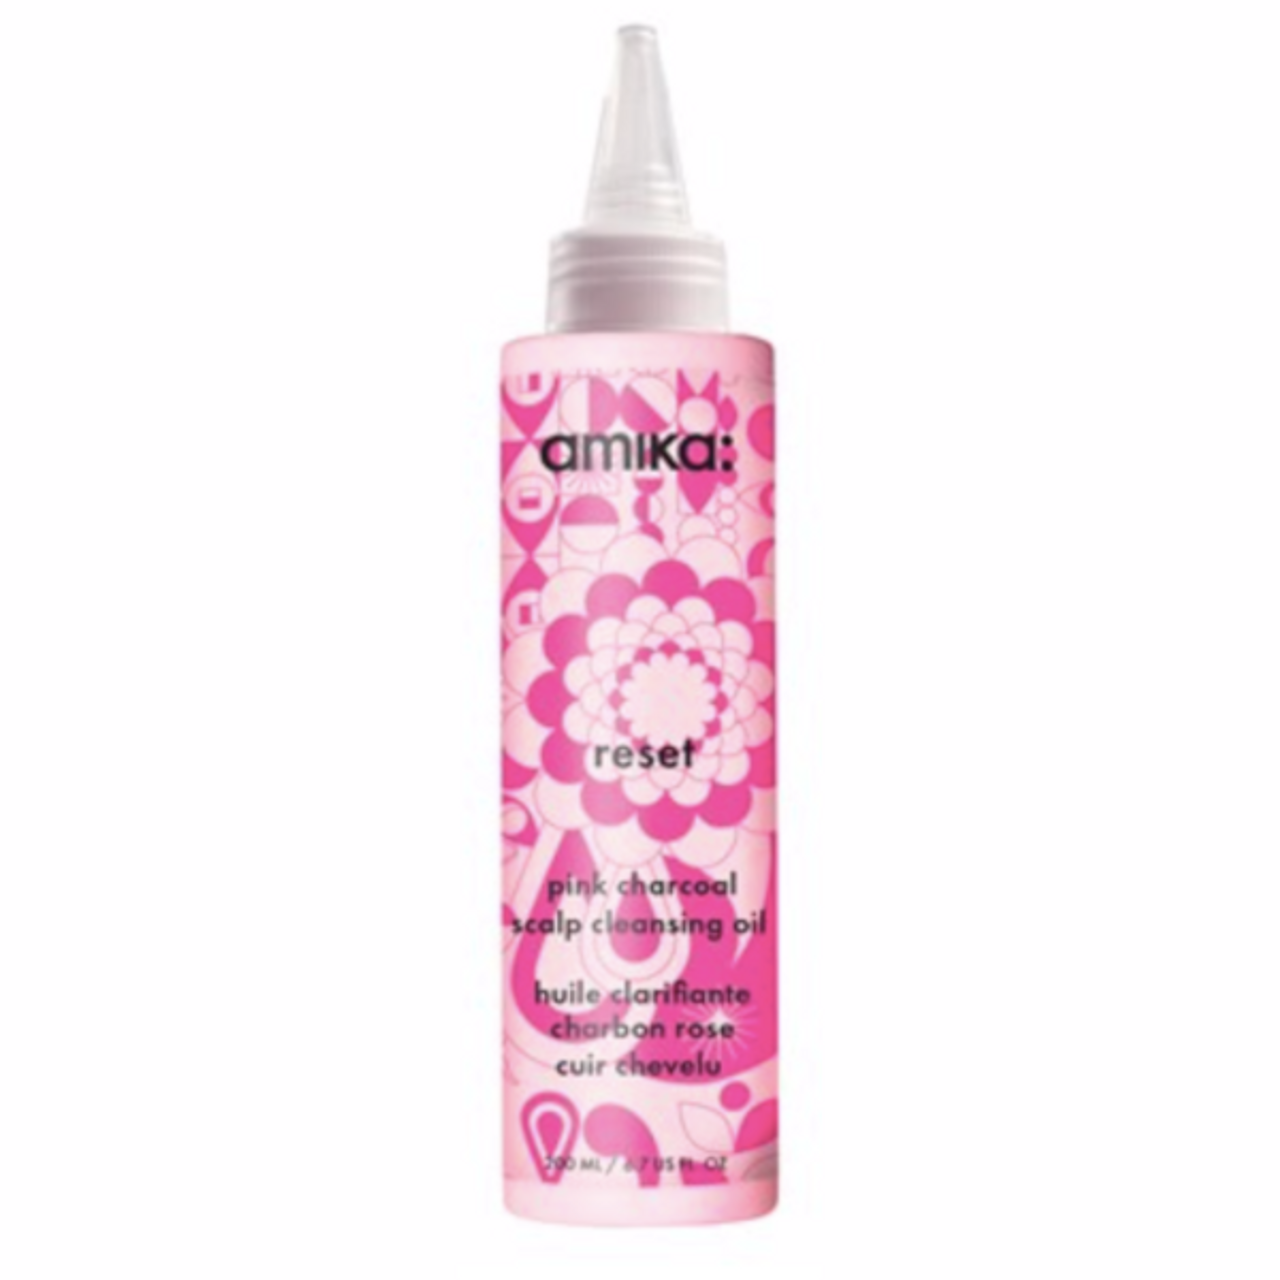 Amika Reset Pink Charcoal Scalp Cleansing Oil - 6.7 oz (80703)